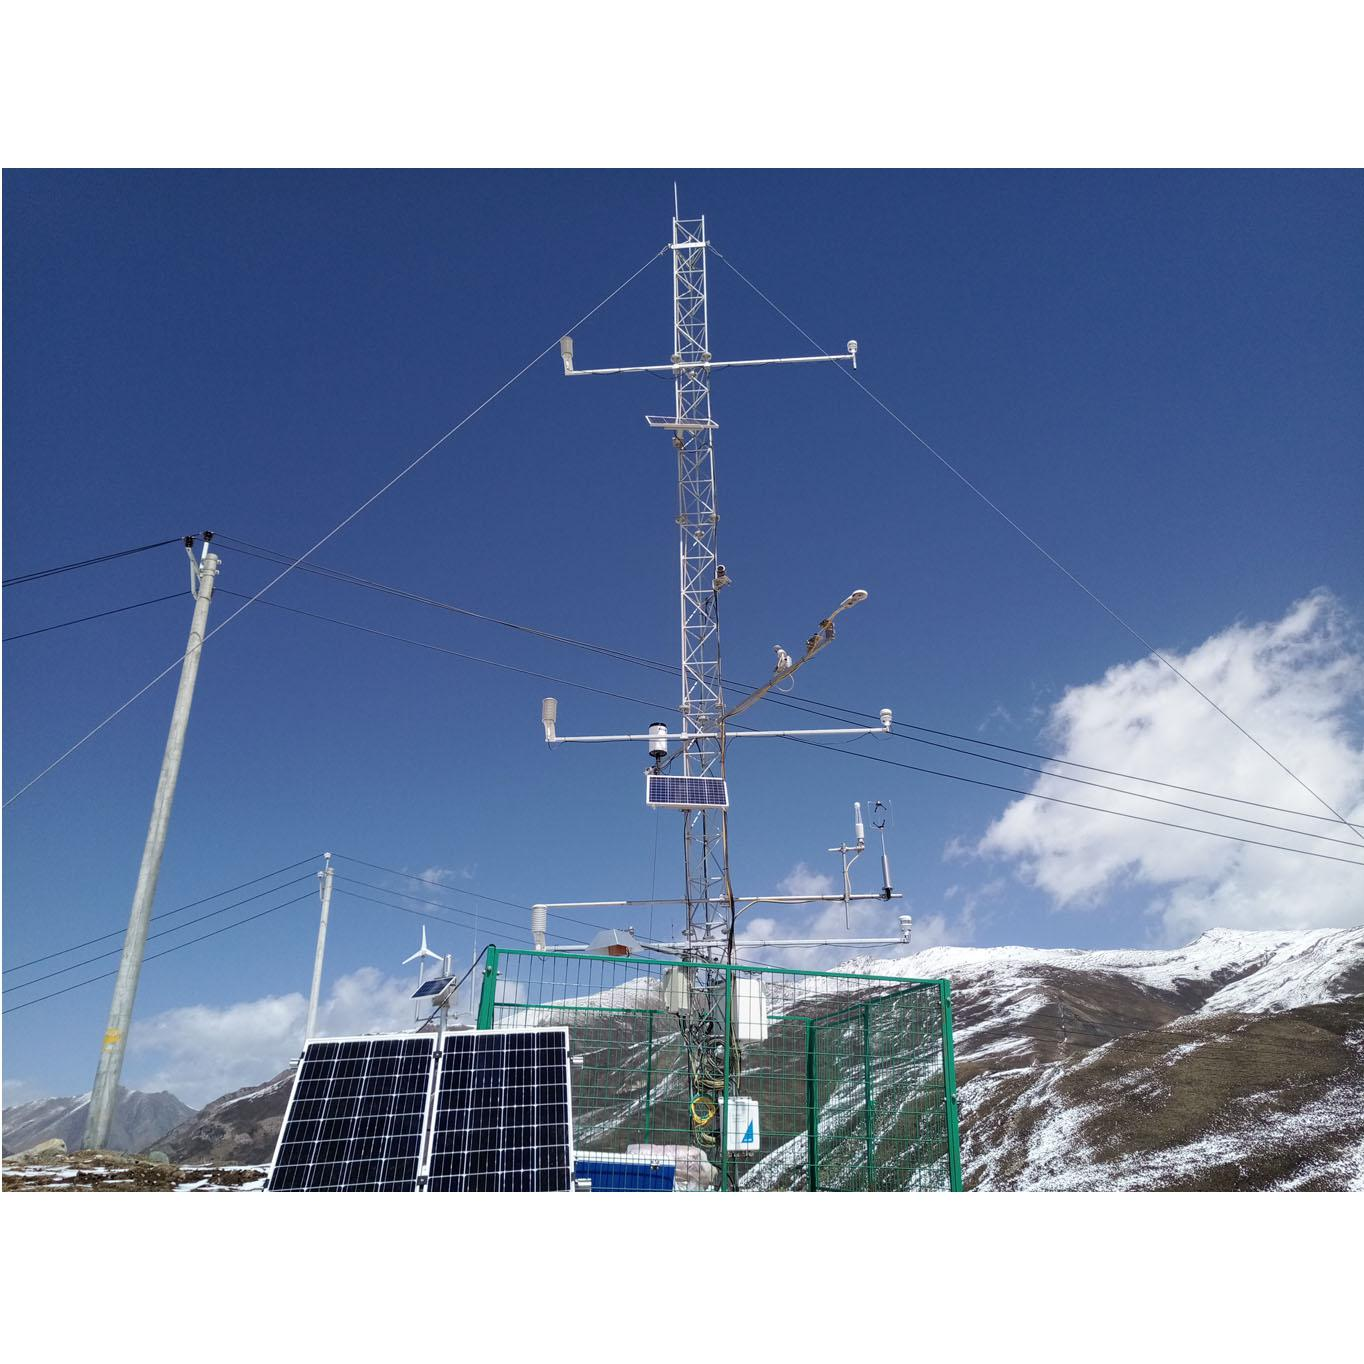 Qilian Mountains integrated observatory network: cold and arid research network of Lanzhou university (an observation system of meteorological elements gradient of Xiyinghe station, 2018)